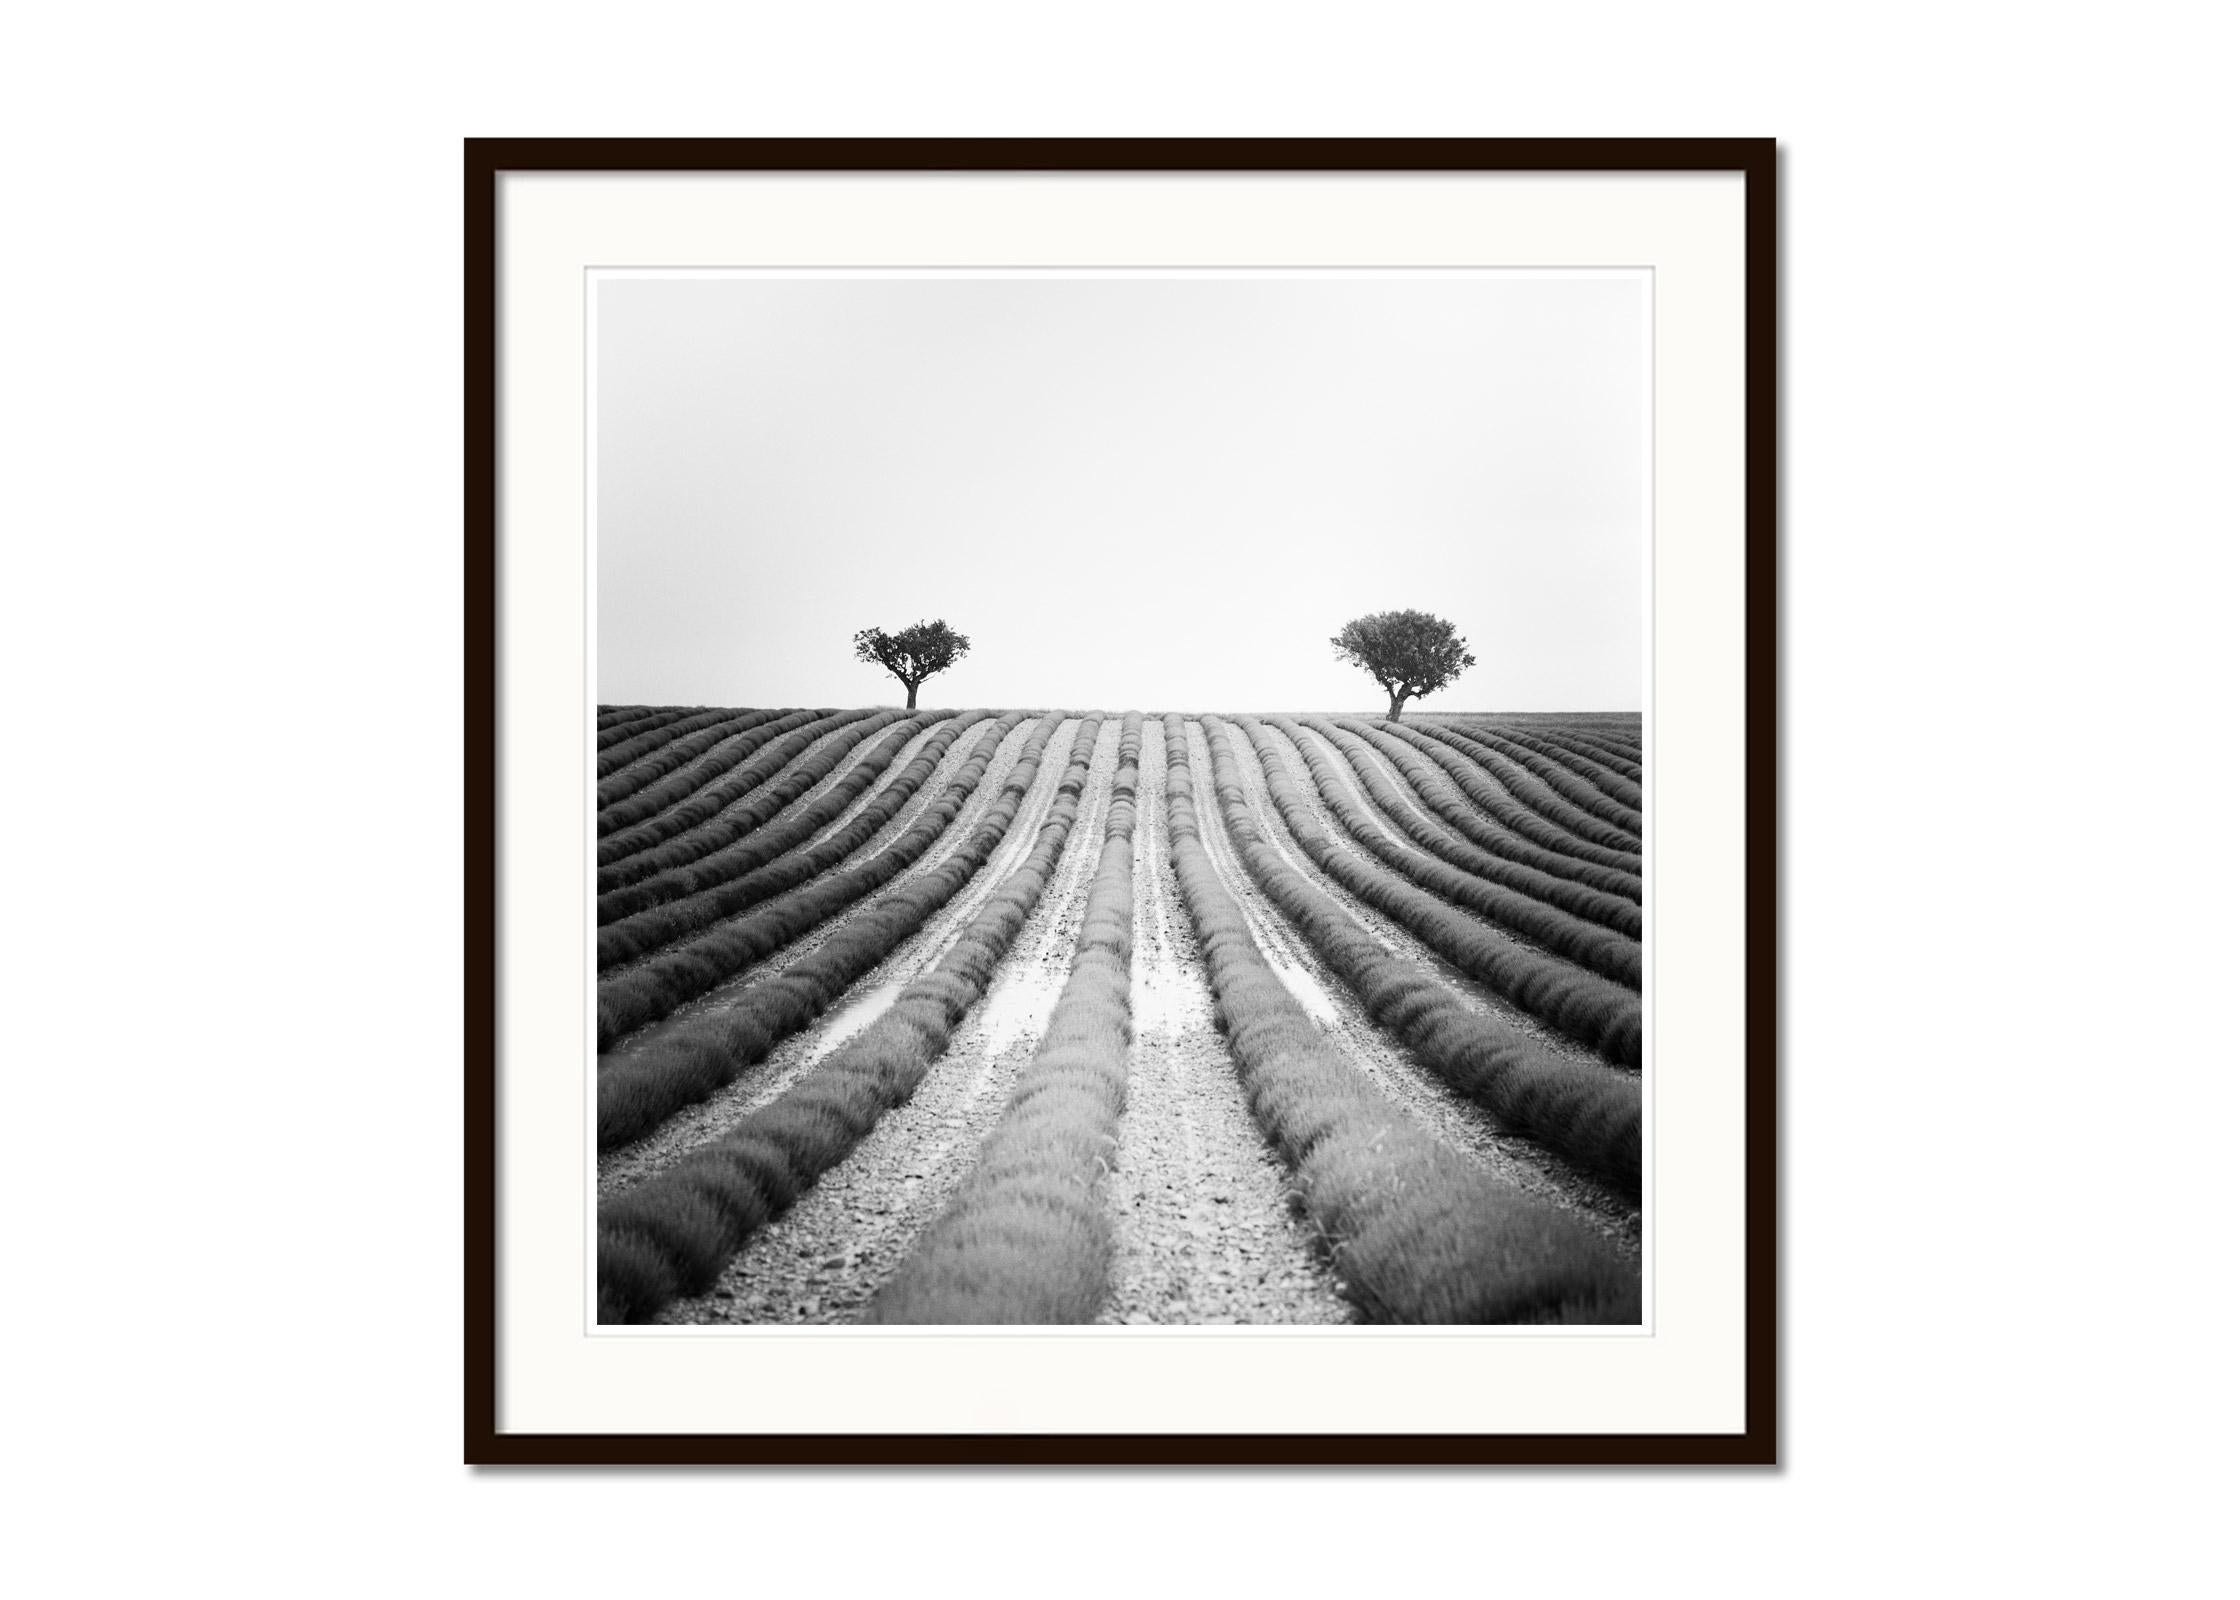 Lavender Field, two Trees, Provence, France, black white landscape photography - Gray Landscape Photograph by Gerald Berghammer